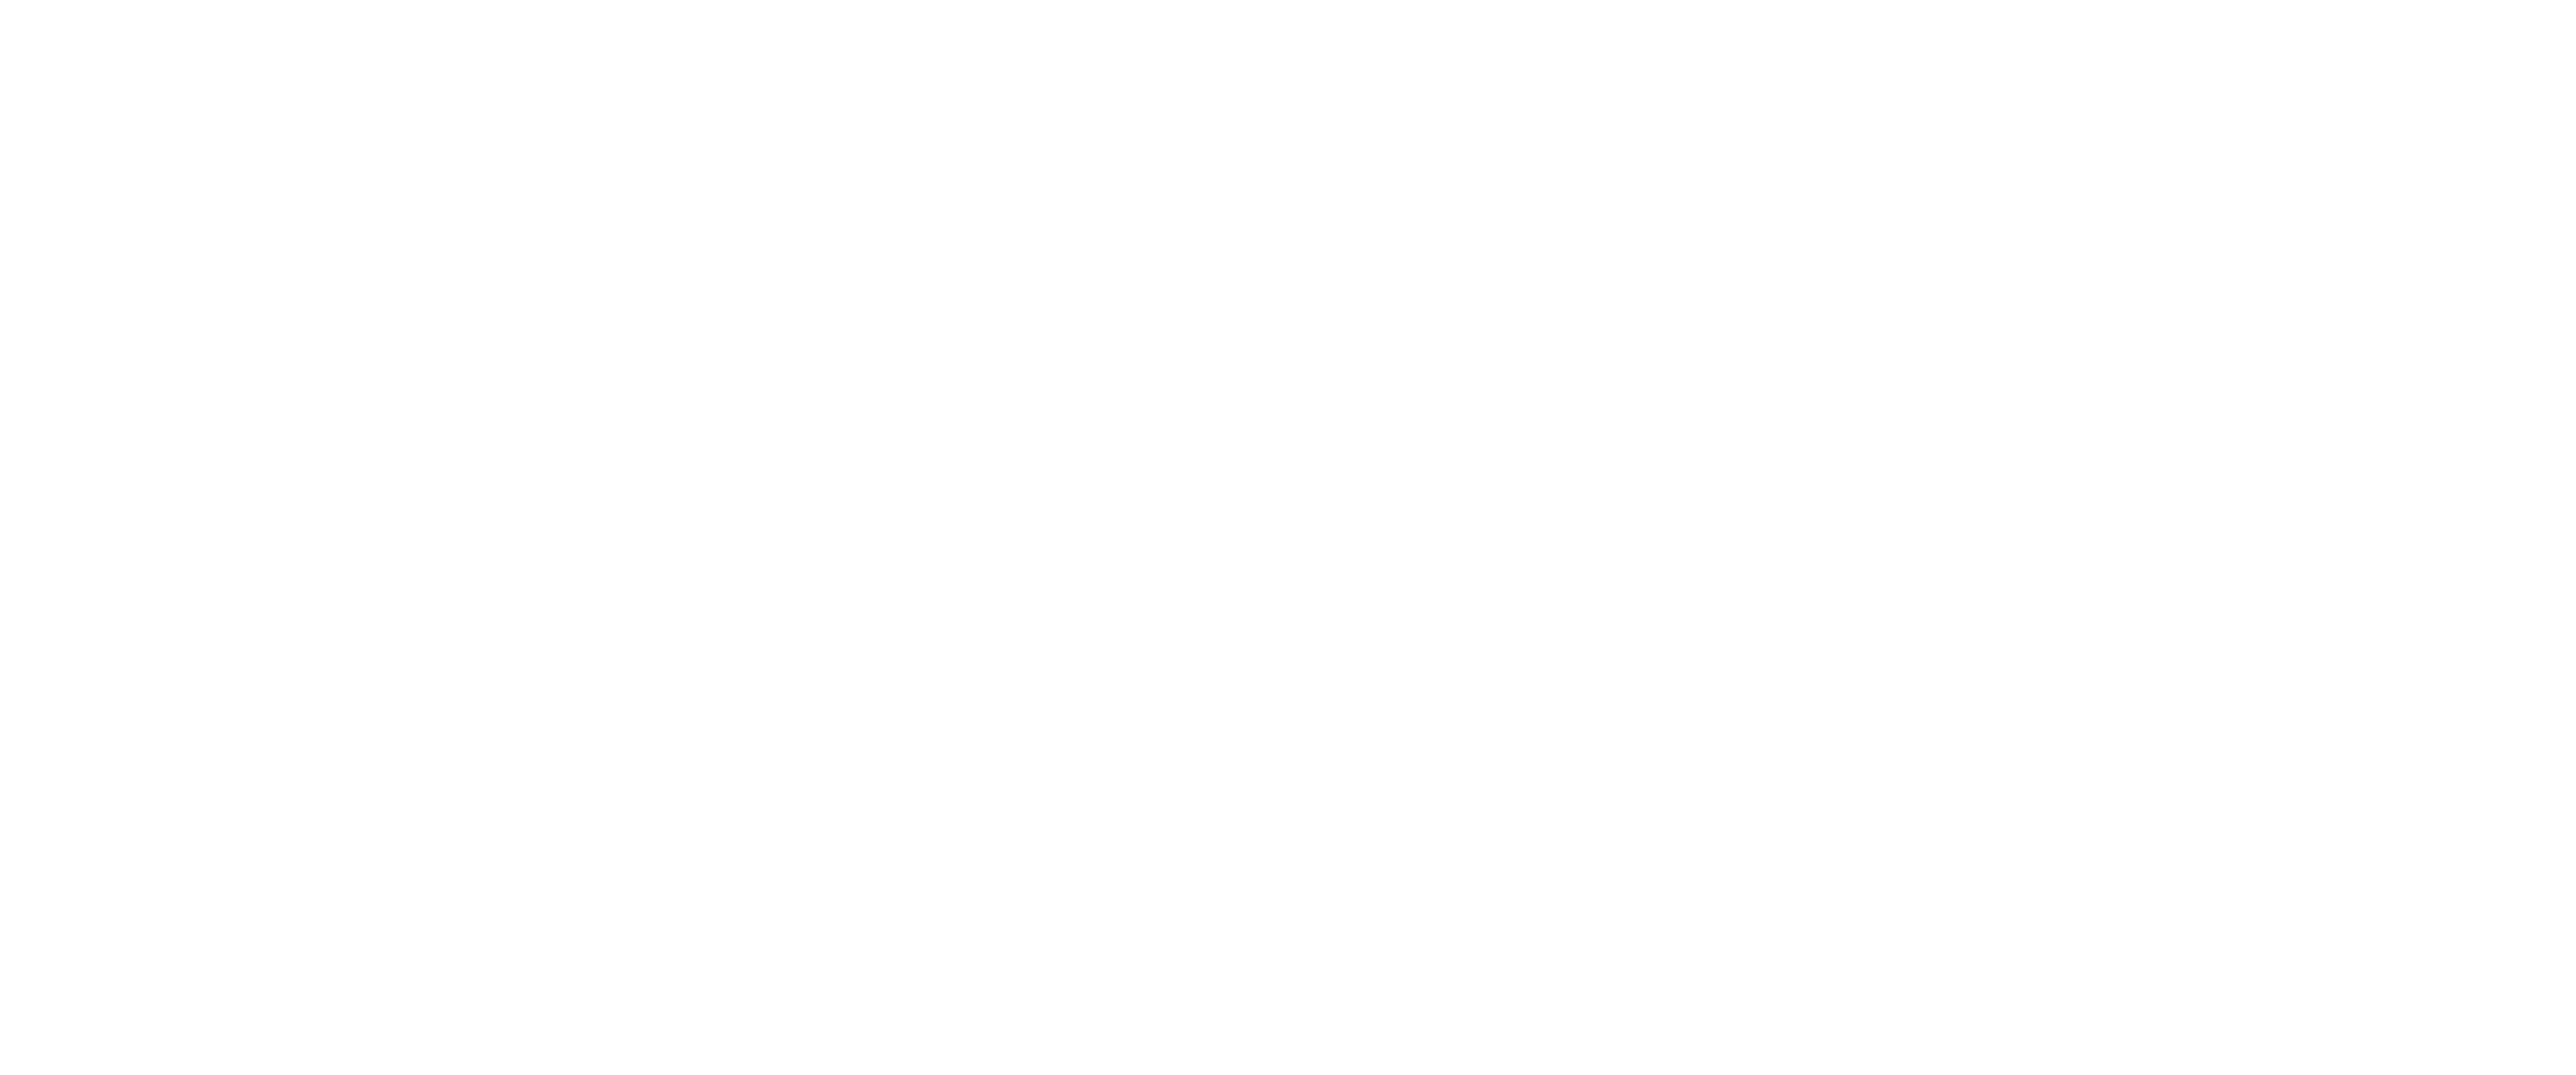 Image file formats lossless. Lace vector png